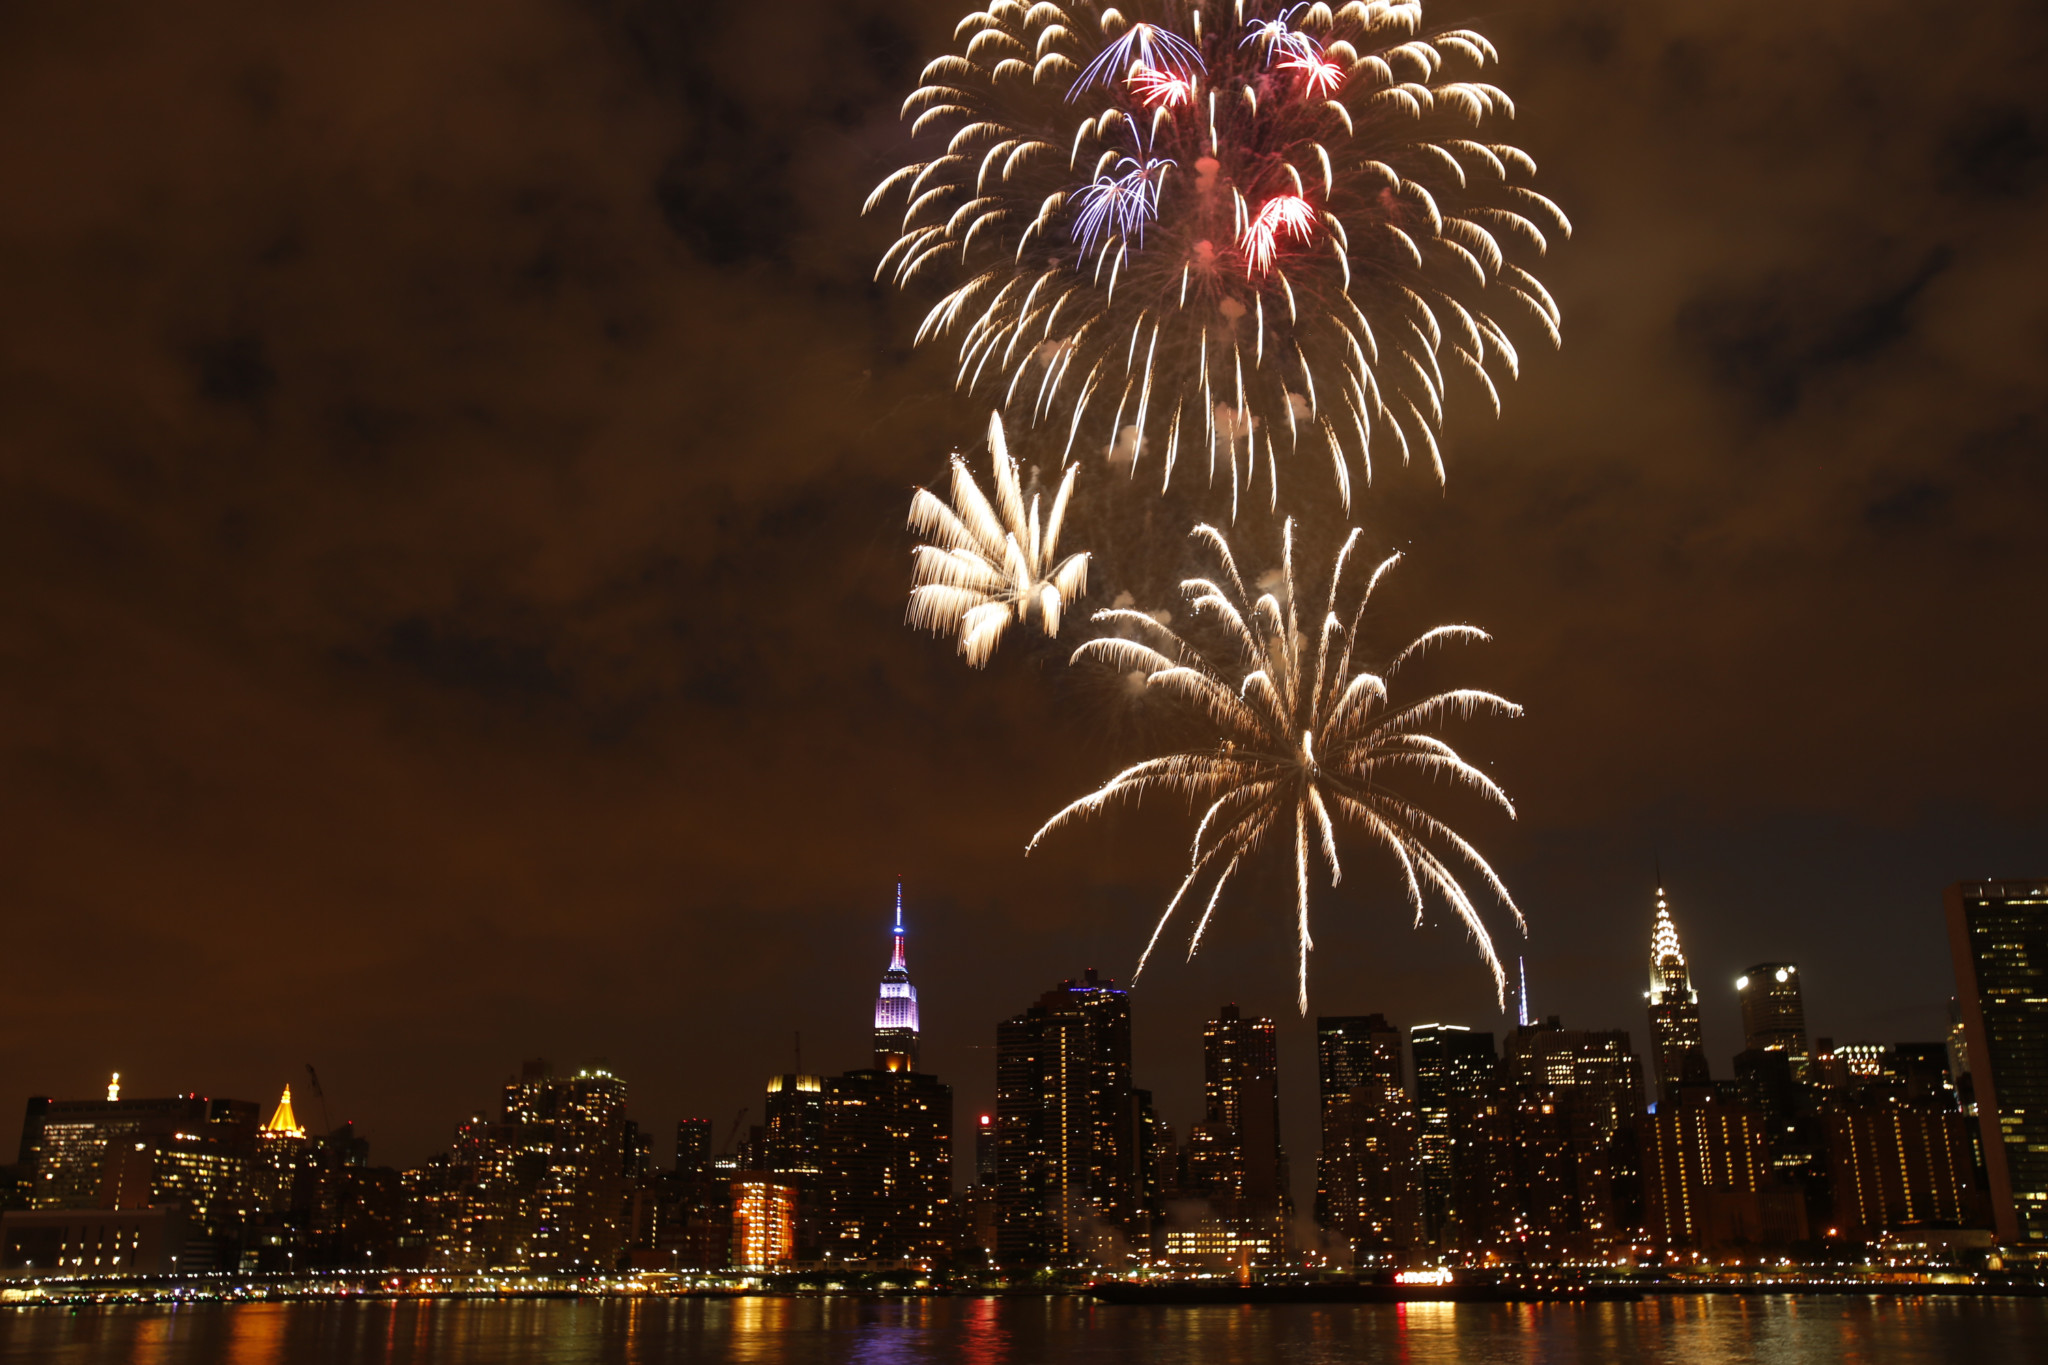 Macy's Fourth of July Fireworks Spectacular - Season 2015